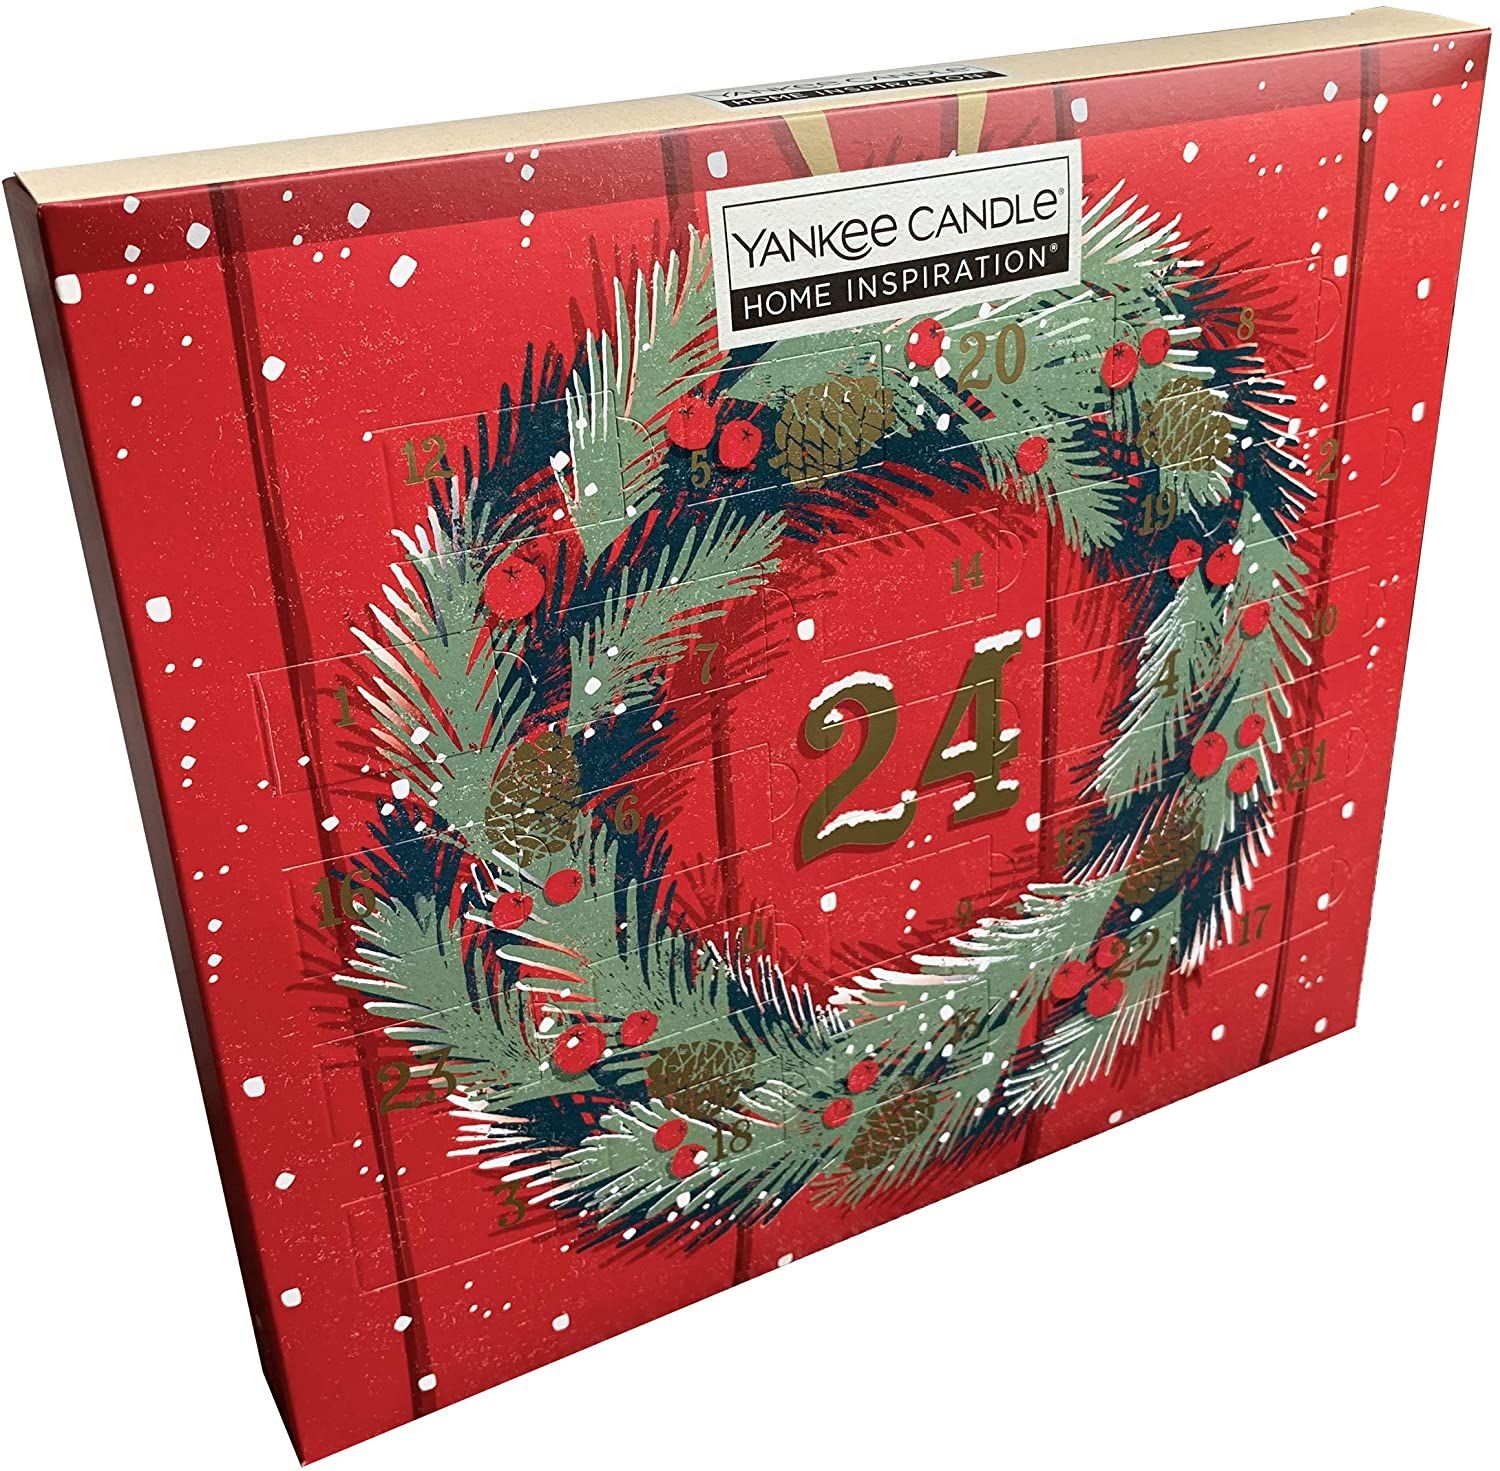 3 Yankee Candle Advent calendars you can buy today Real Homes